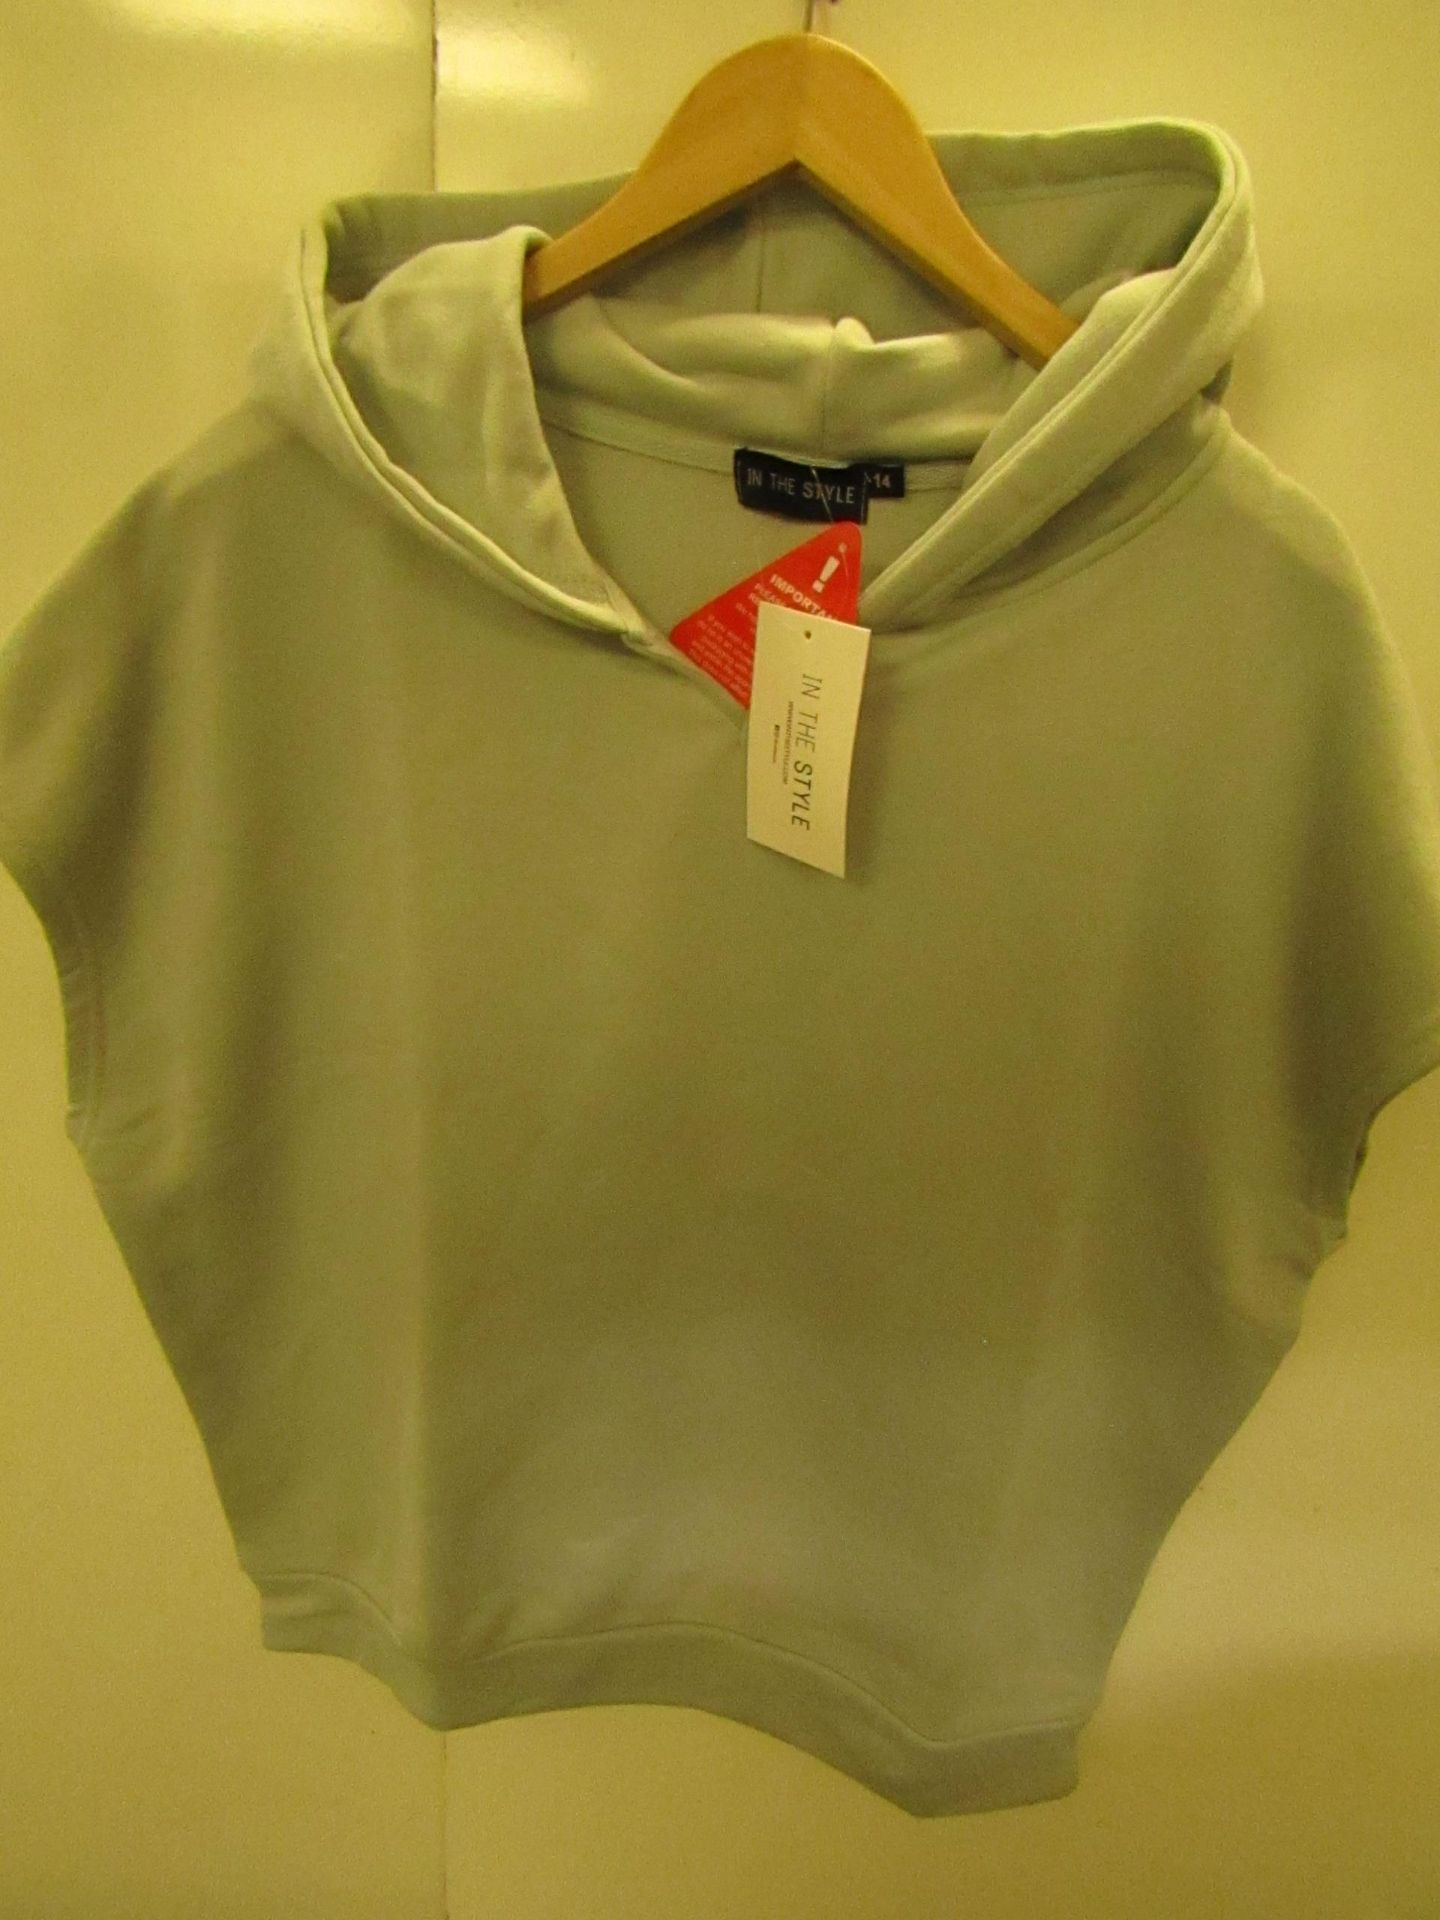 In The Style Sleeveless Hooded Top Grey Size 14 New With Tags